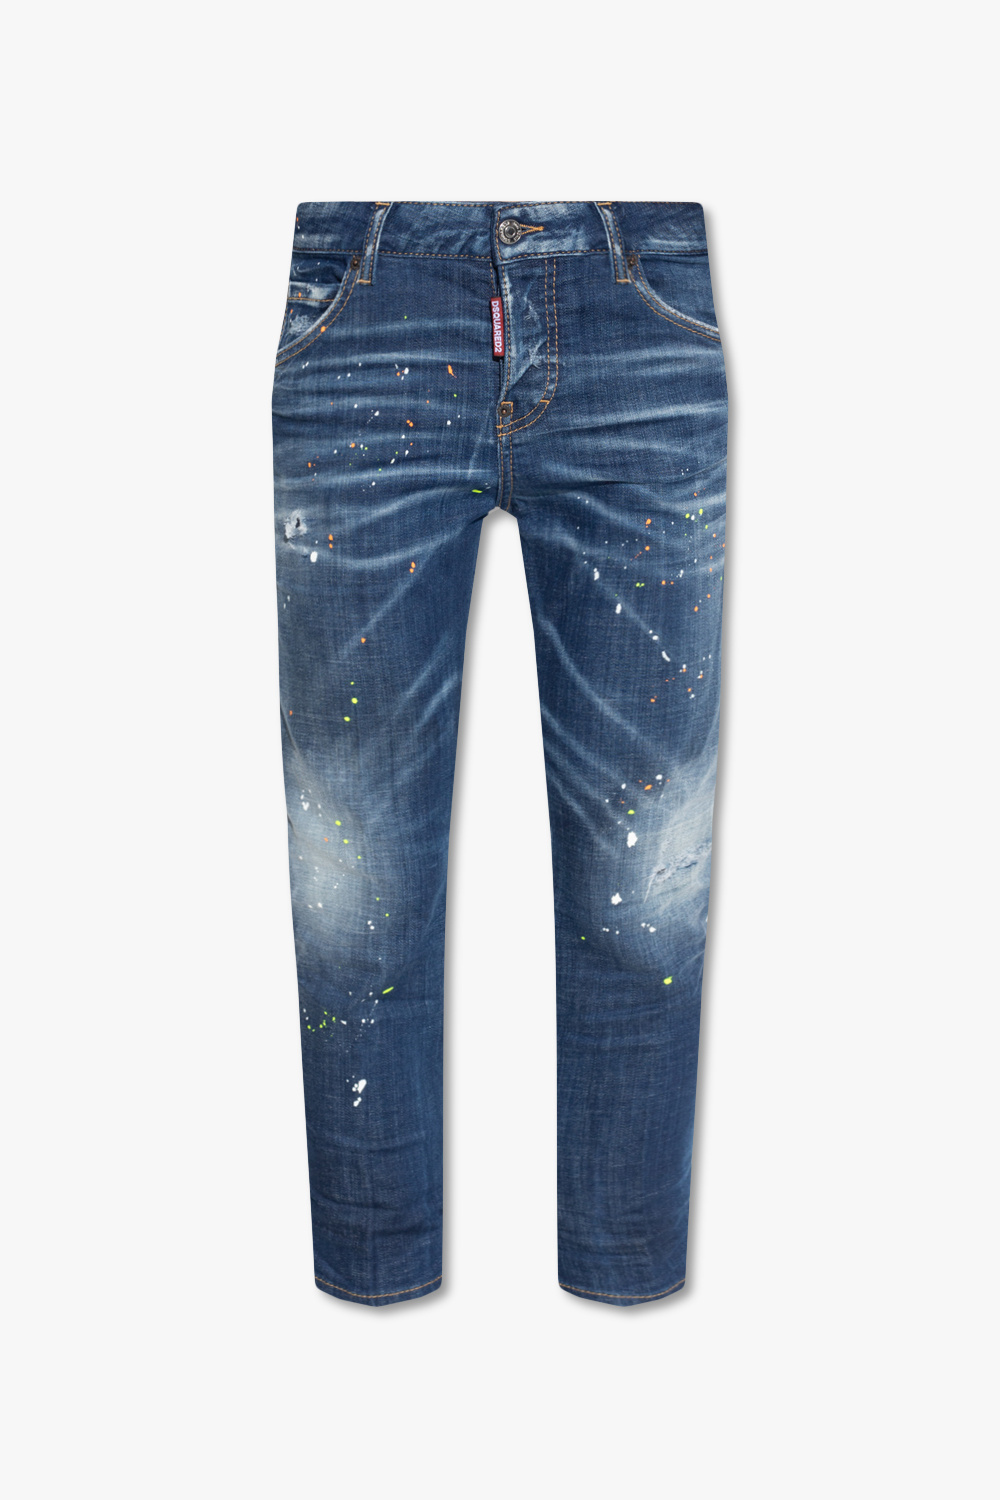 Blue 'Cool Girl Cropped' jeans Dsquared2 - GenesinlifeShops 